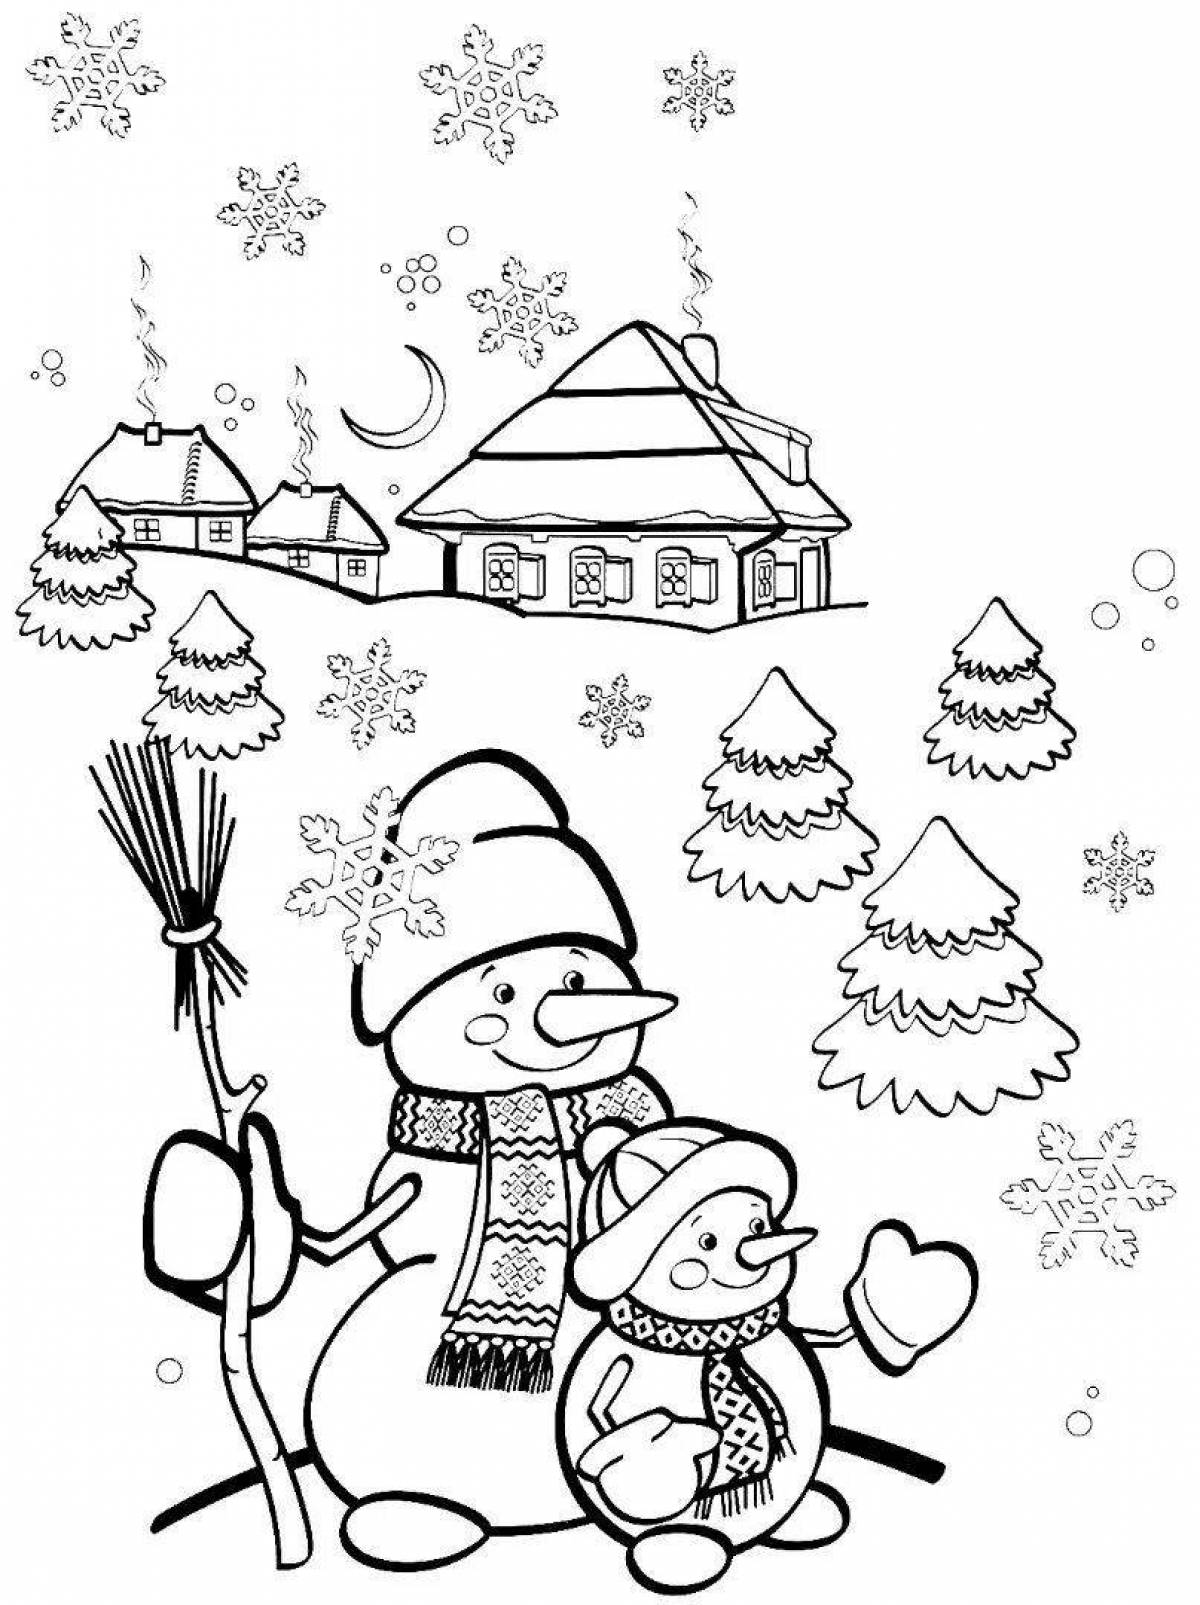 Cheerful winter landscape coloring book for children 10 years old